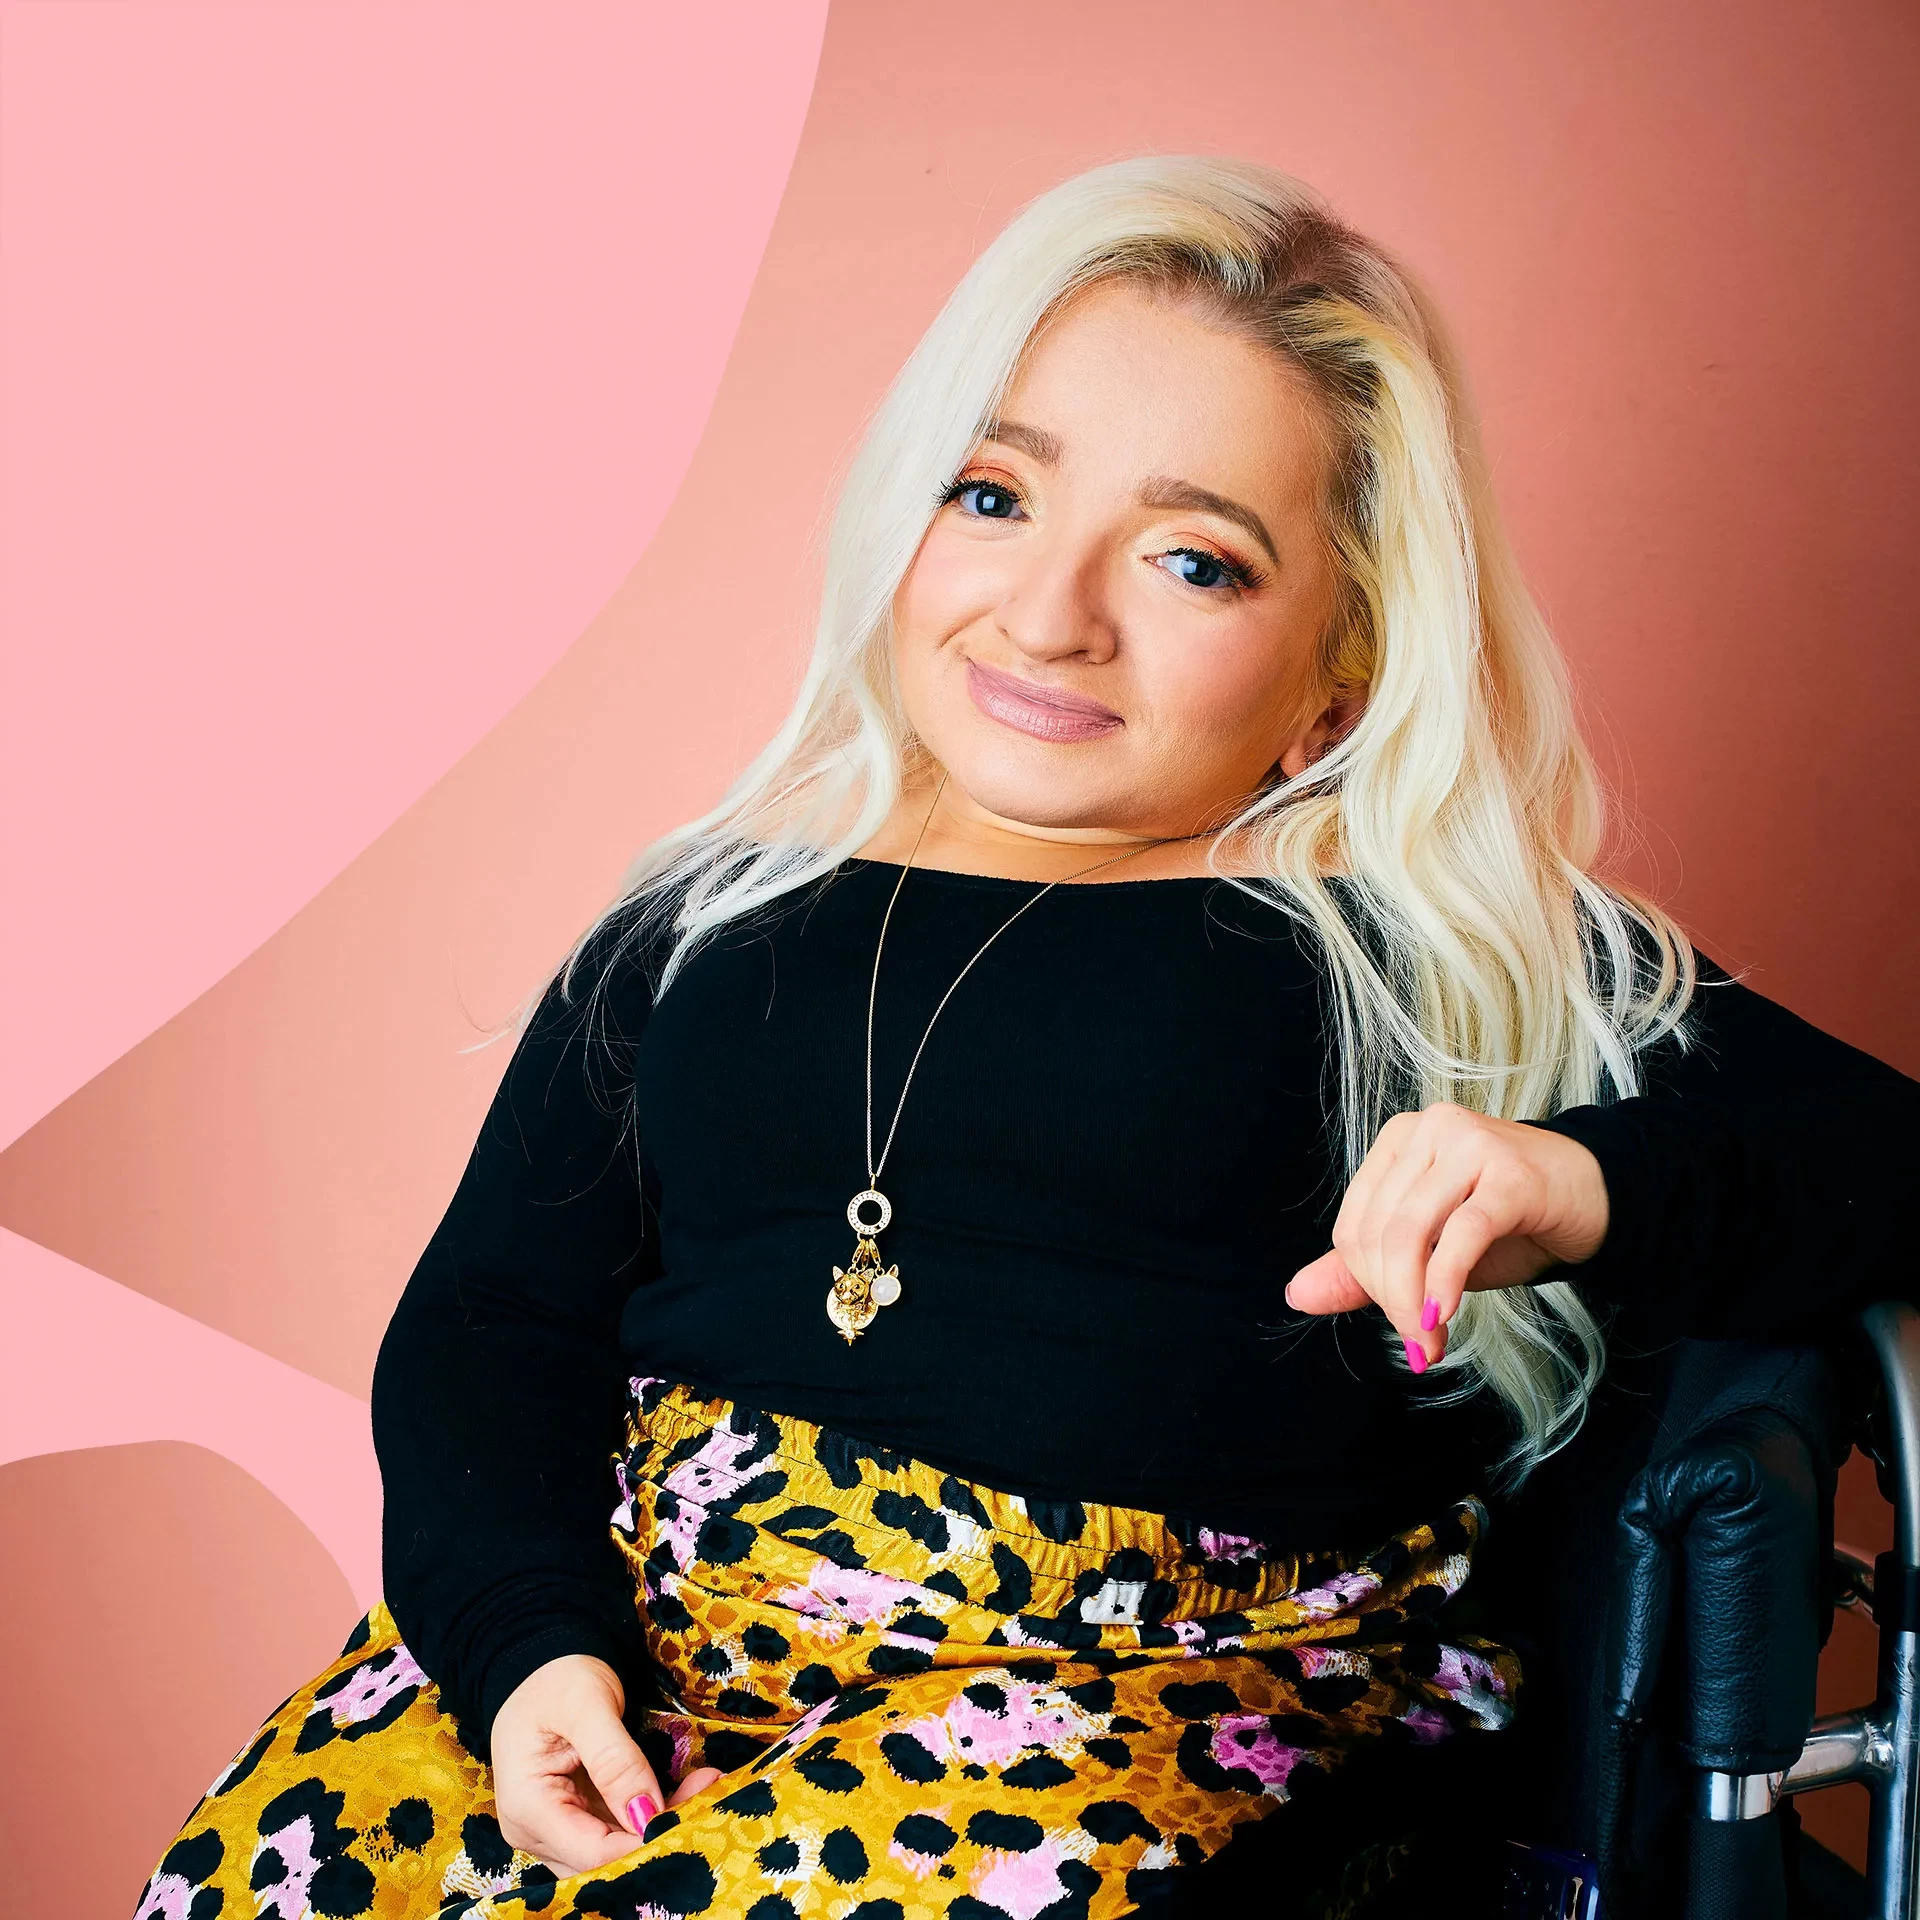 Samantha Renke, actress, presenter & disability activist, smiling at the camera wearing a black top and yellow leopard skirt.